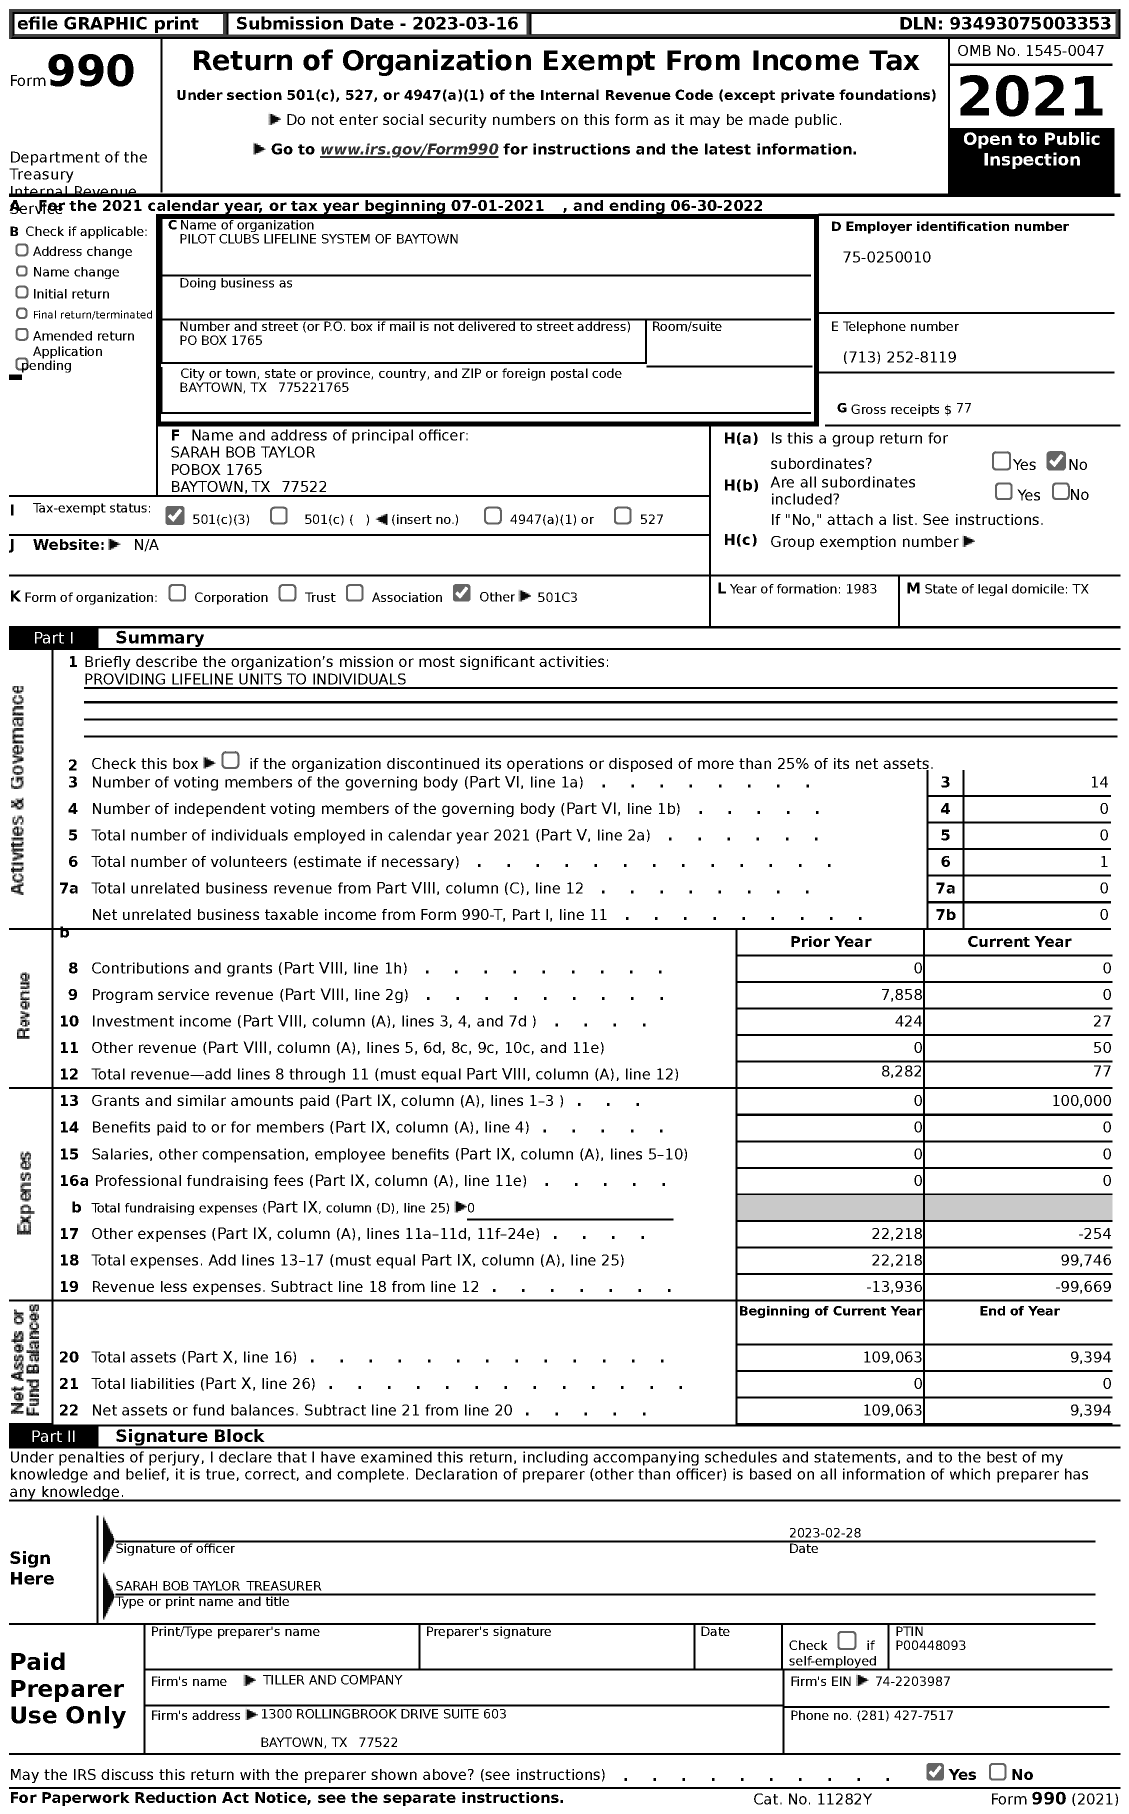 Image of first page of 2021 Form 990 for Pilot Clubs Lifeline System of Baytown